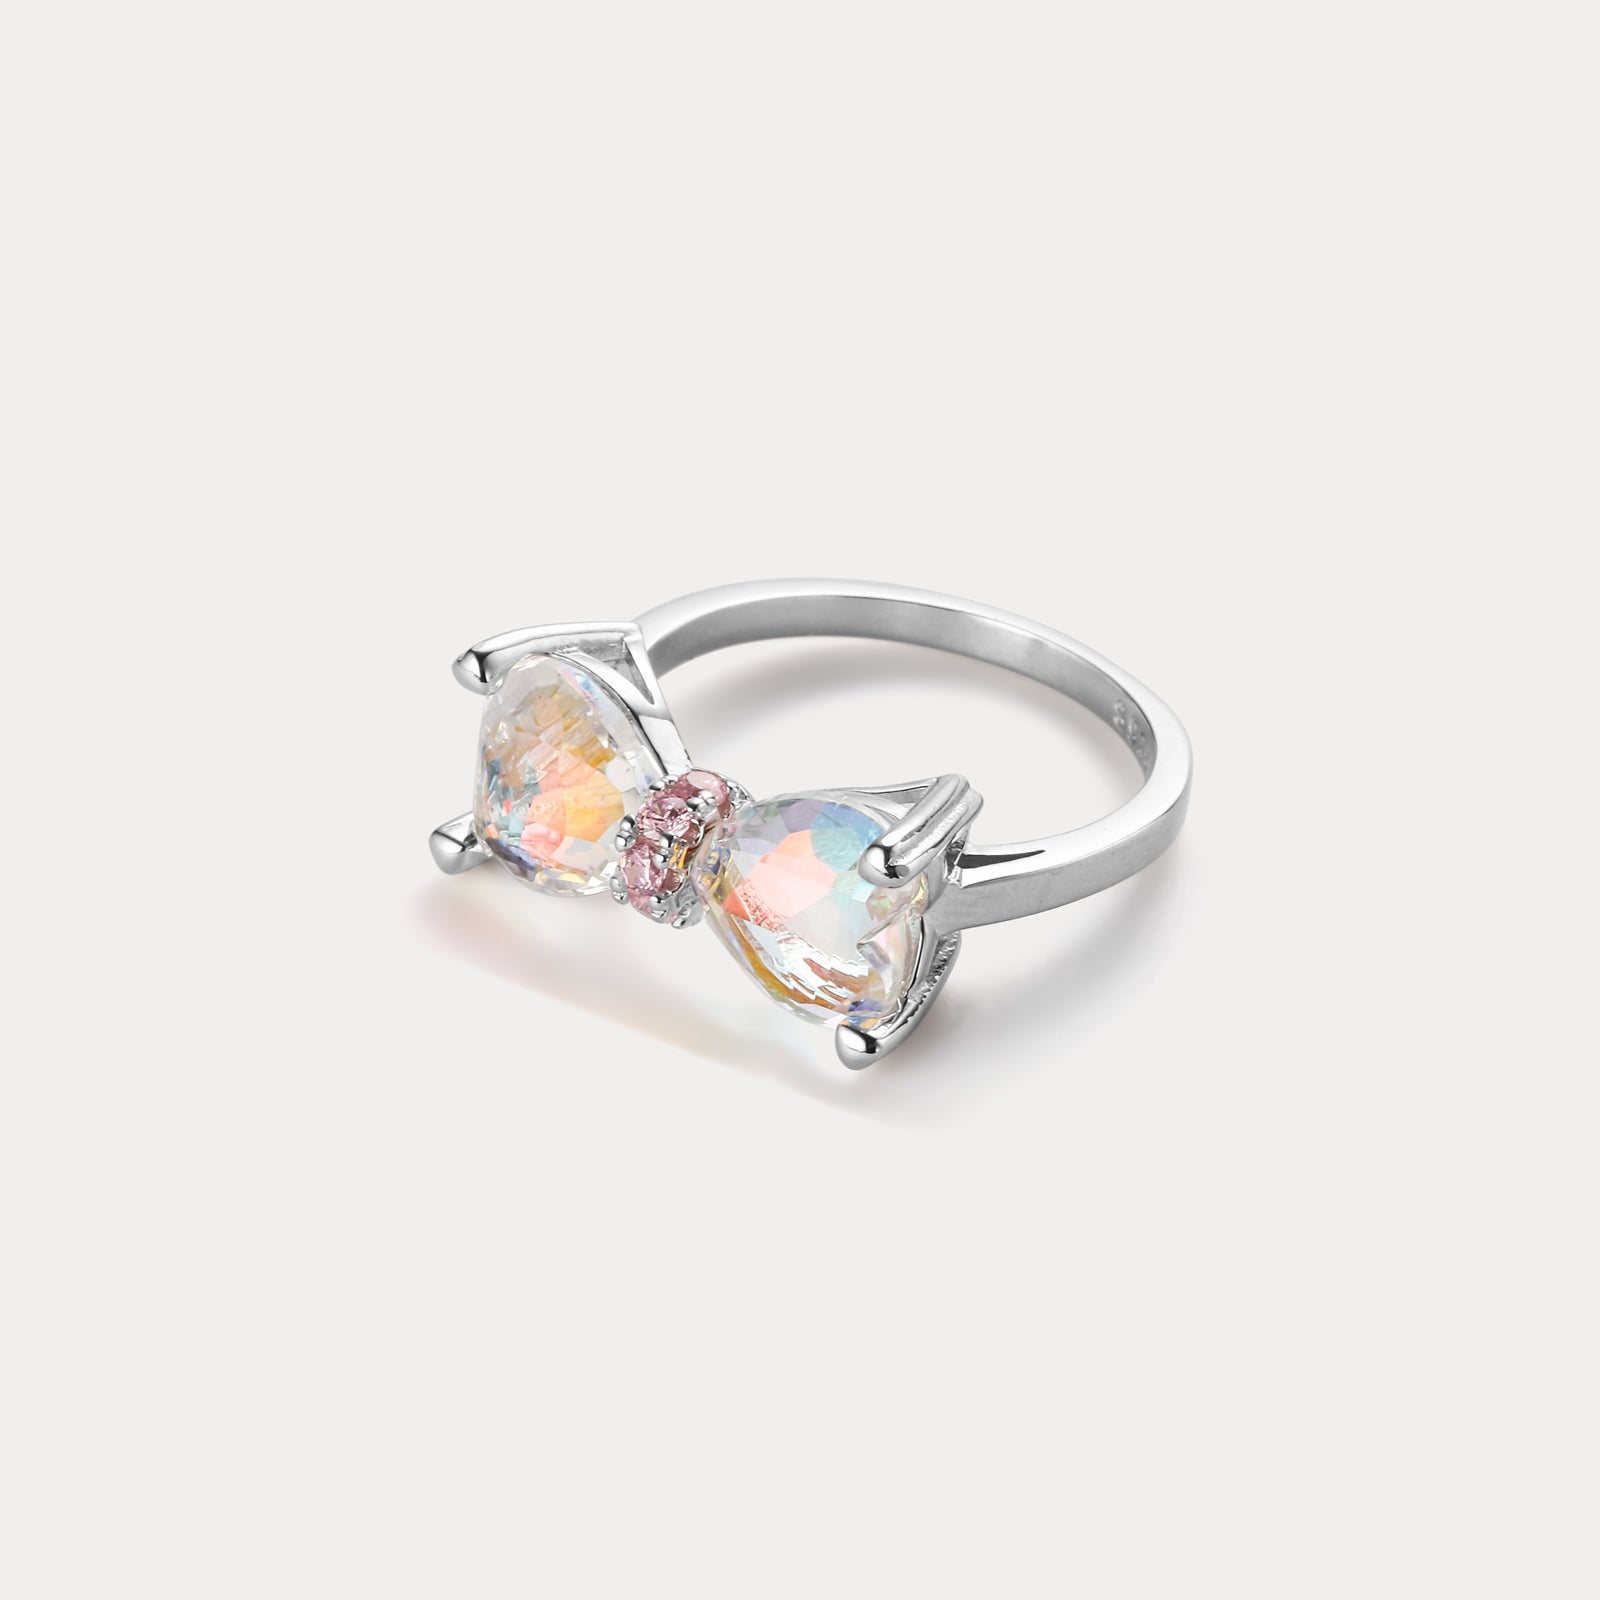 Glass Bow Tie Ring